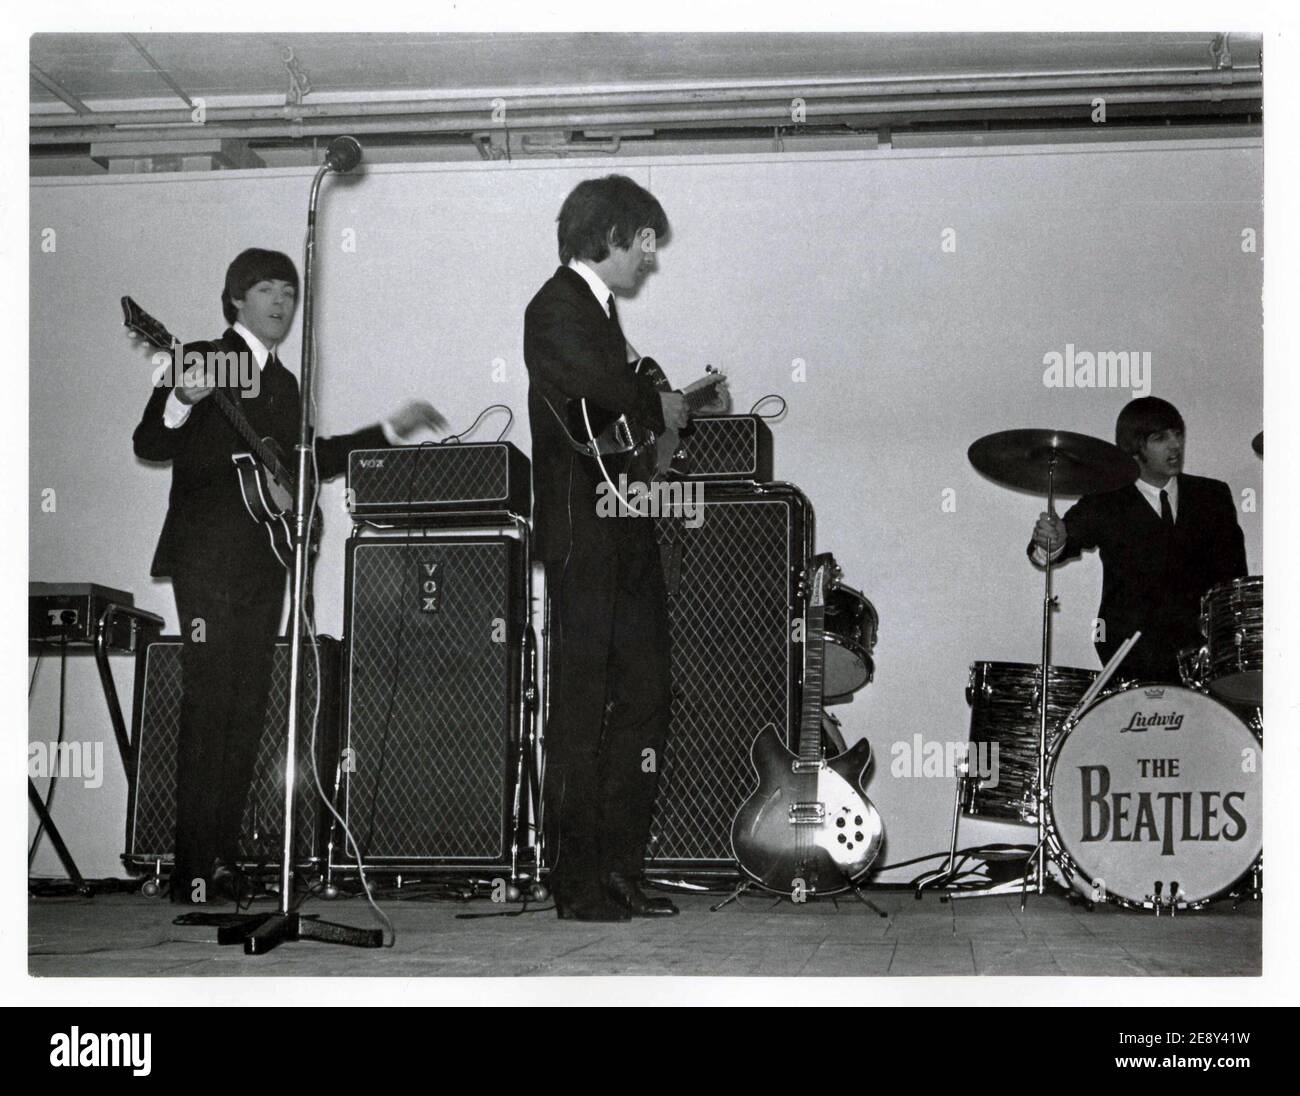 The Beatles rehearsing for a show, on stage Stock Photo